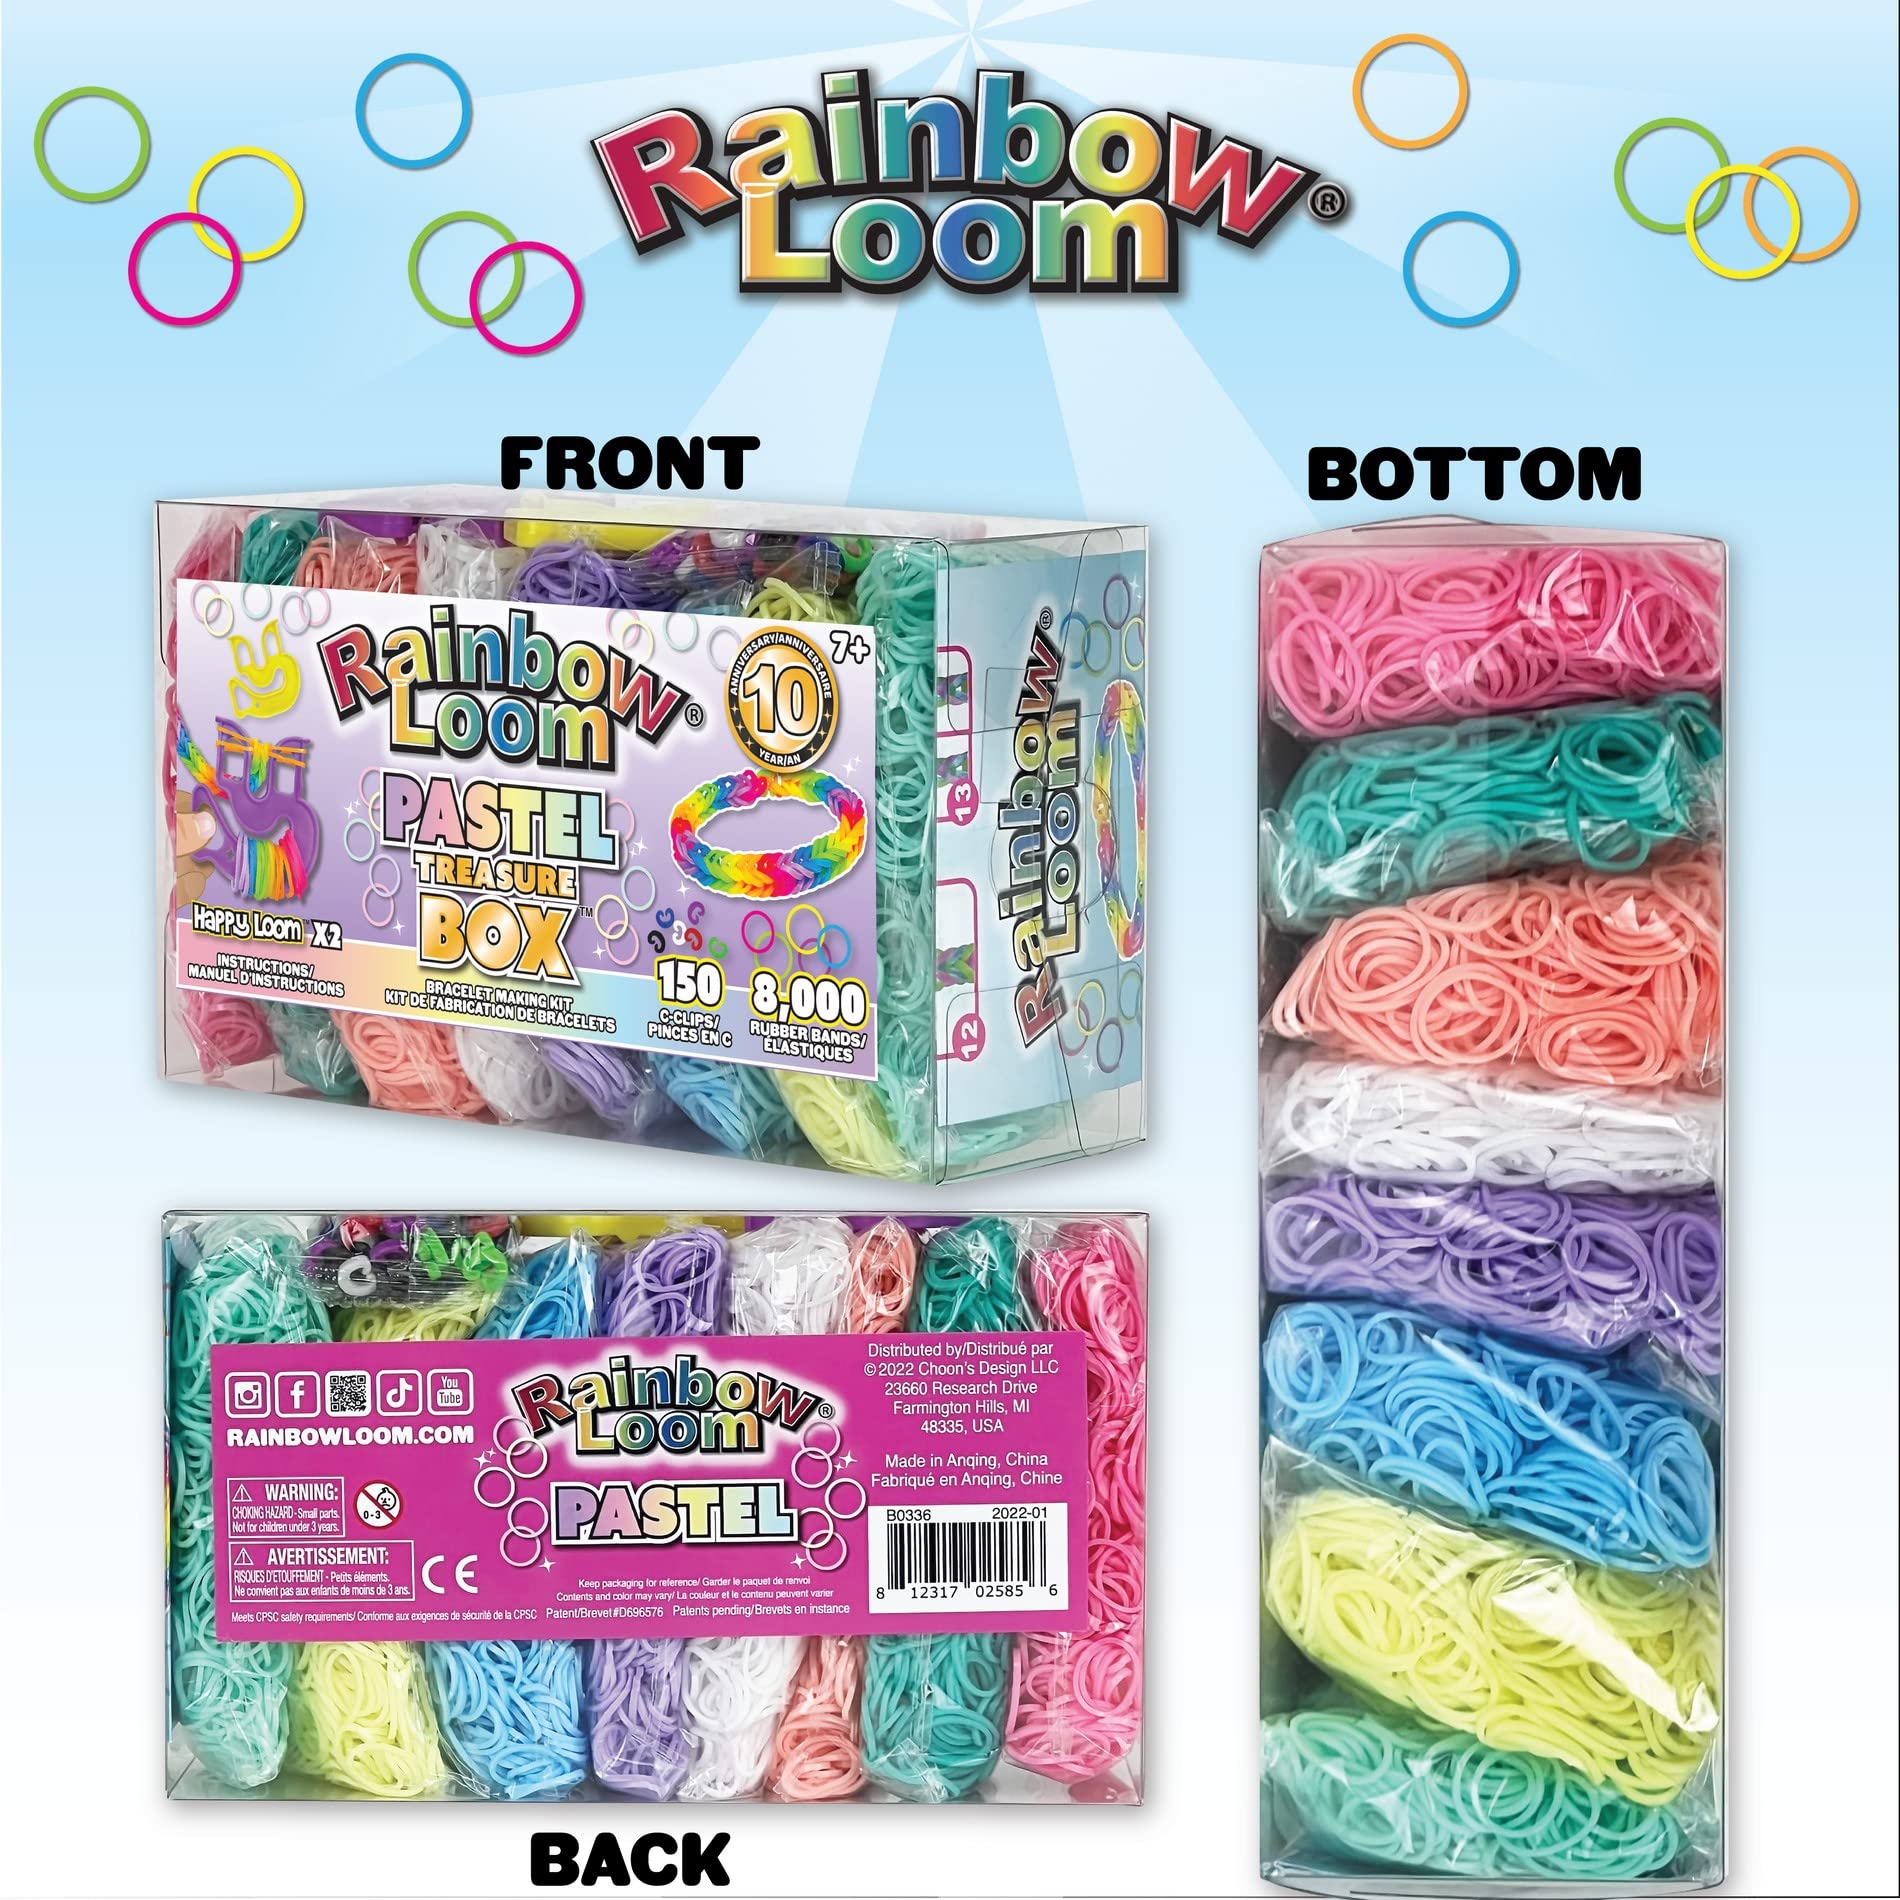 Rainbow Loom® Treasure Box Pastel Edition, 8,000 Rubber Bands in 8 Different Pastel Colors, and a BONUS of 2 Happy Looms, Great Activities for Boys and Girls 7+